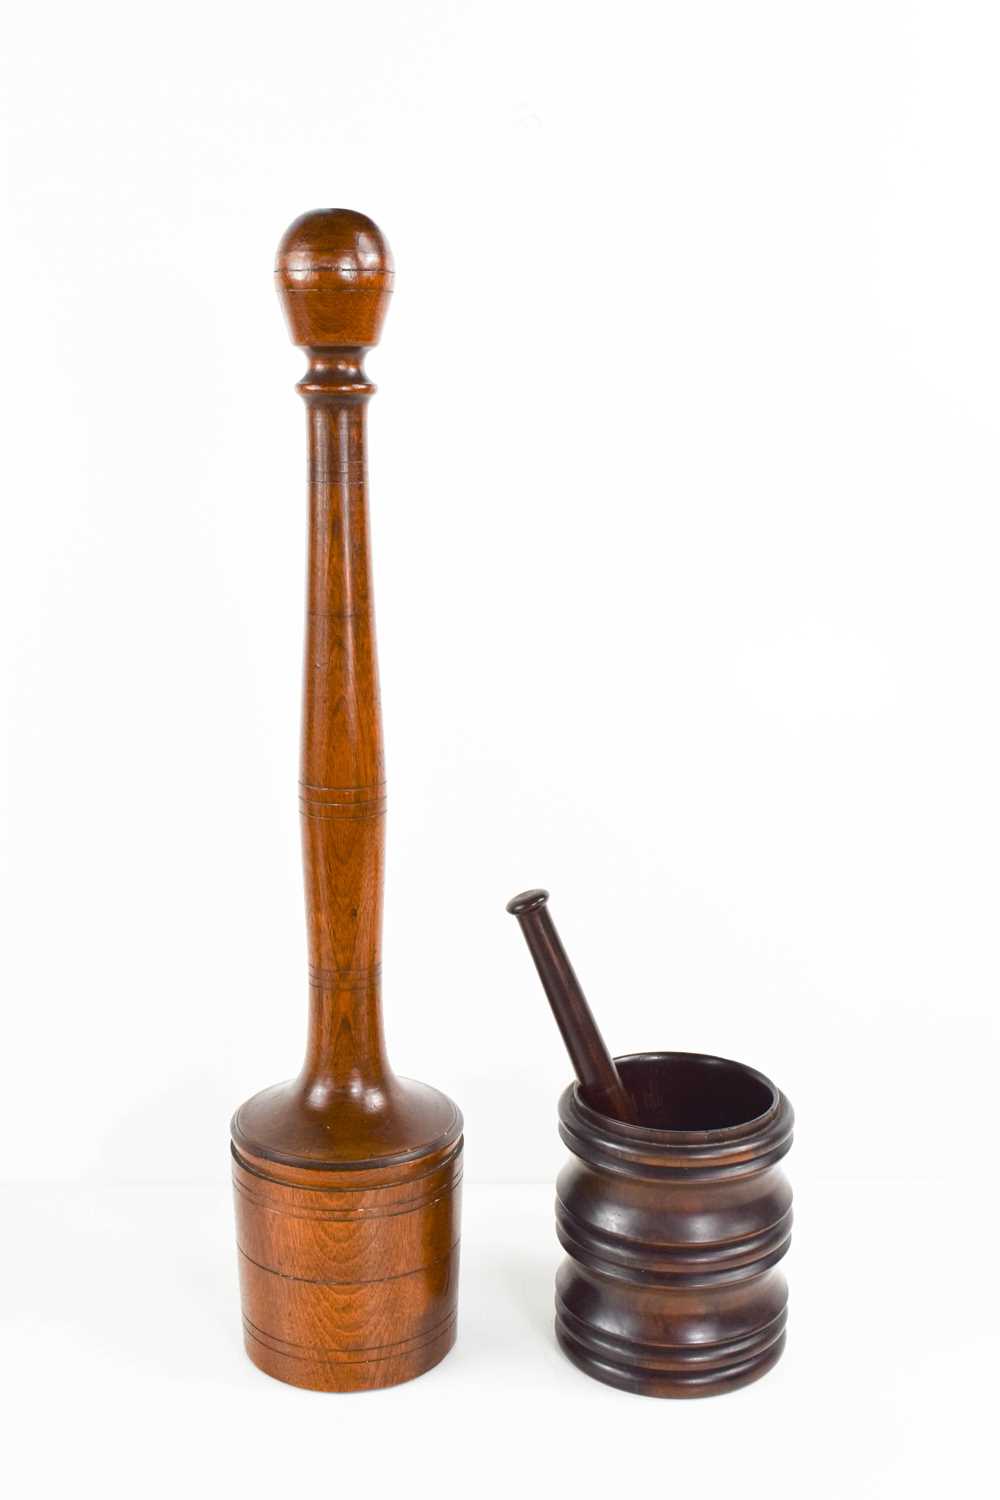 A 19th century treen potato masher, with a turned handle, and a lignum vitae mortar and matching